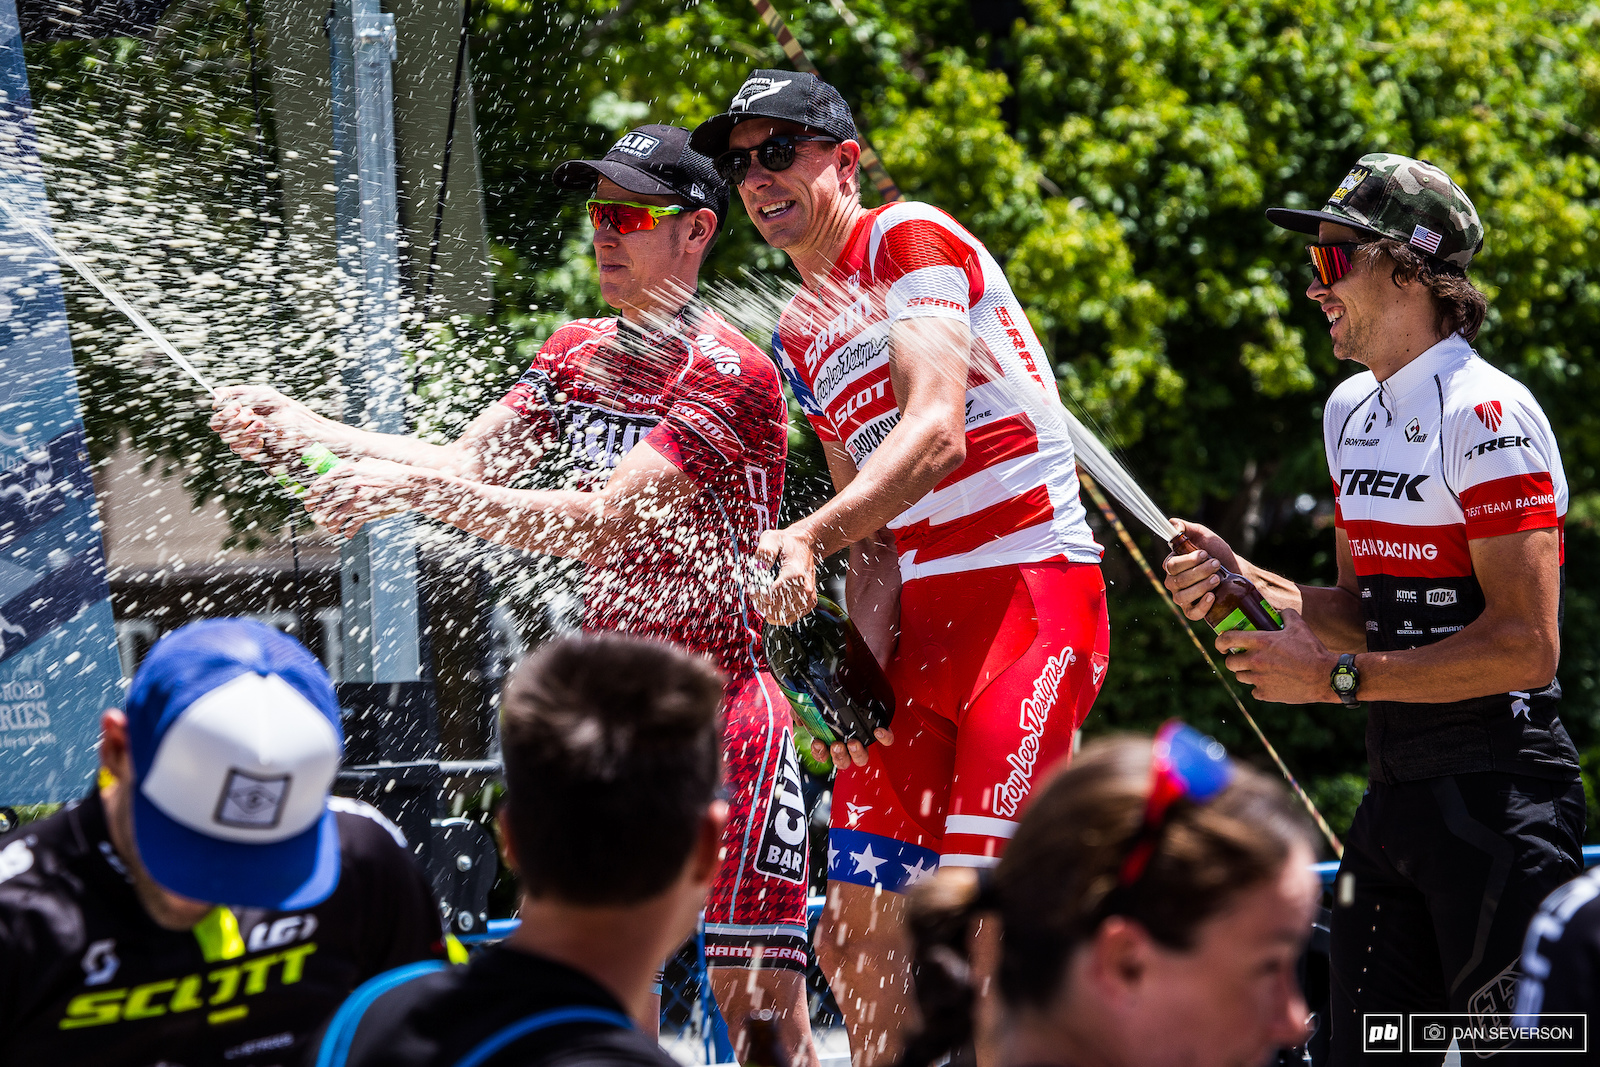 Todd Wells Benjamin Sonntag and Nic Beechan celebrate as the top three Pro Men in the Epic Rides race series. Some large checks were taken home.